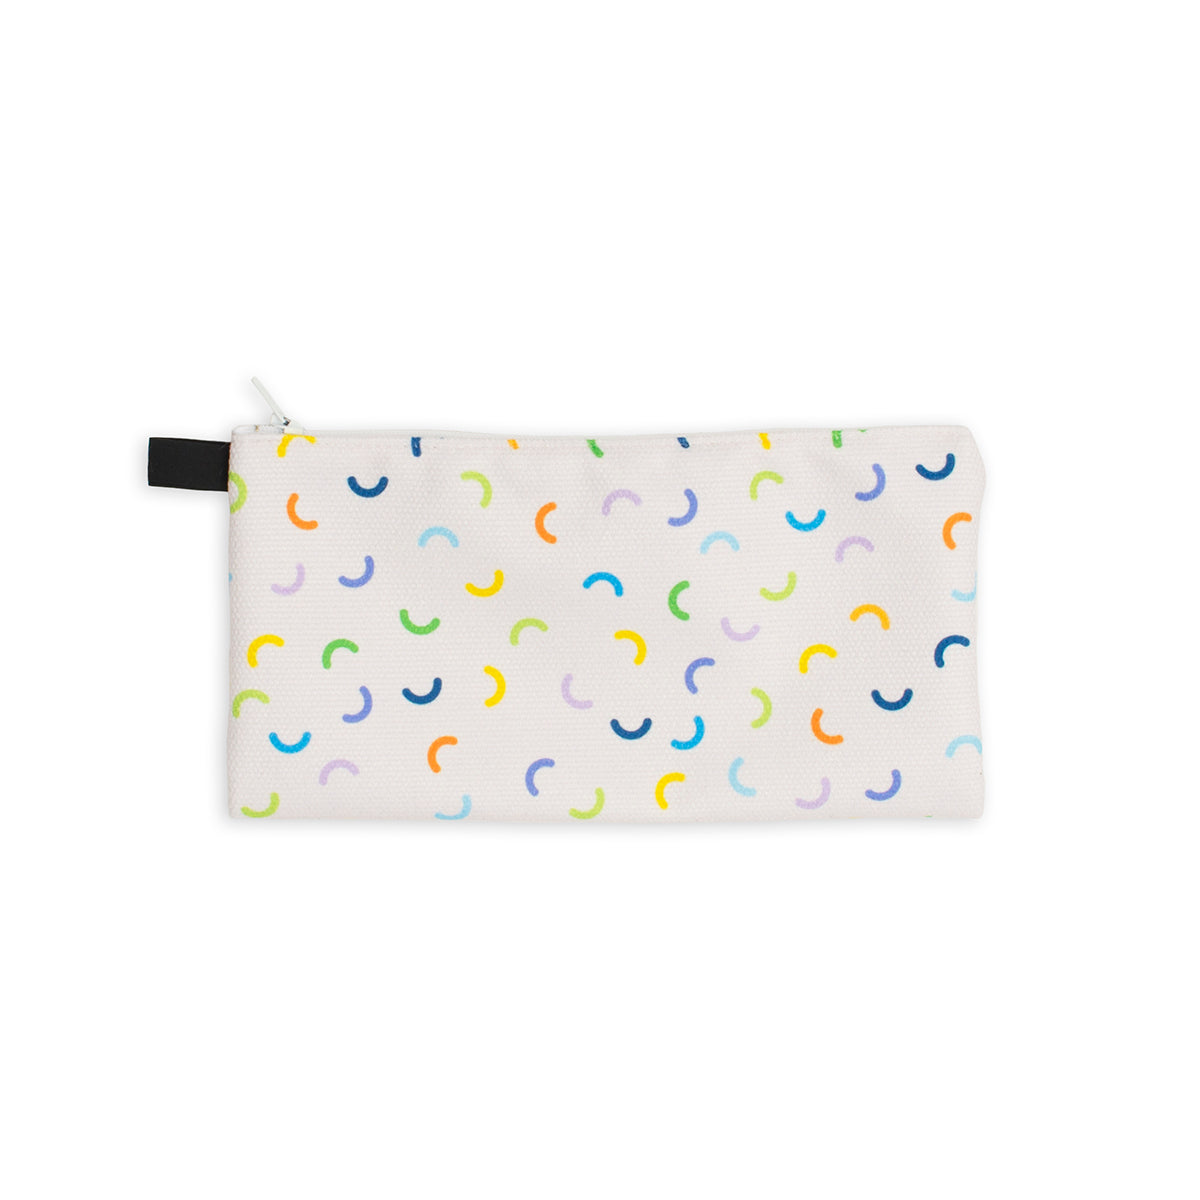 9" x 4" white pencil case with macaroni pattern in shades of blue, green, yellow, orange and purple